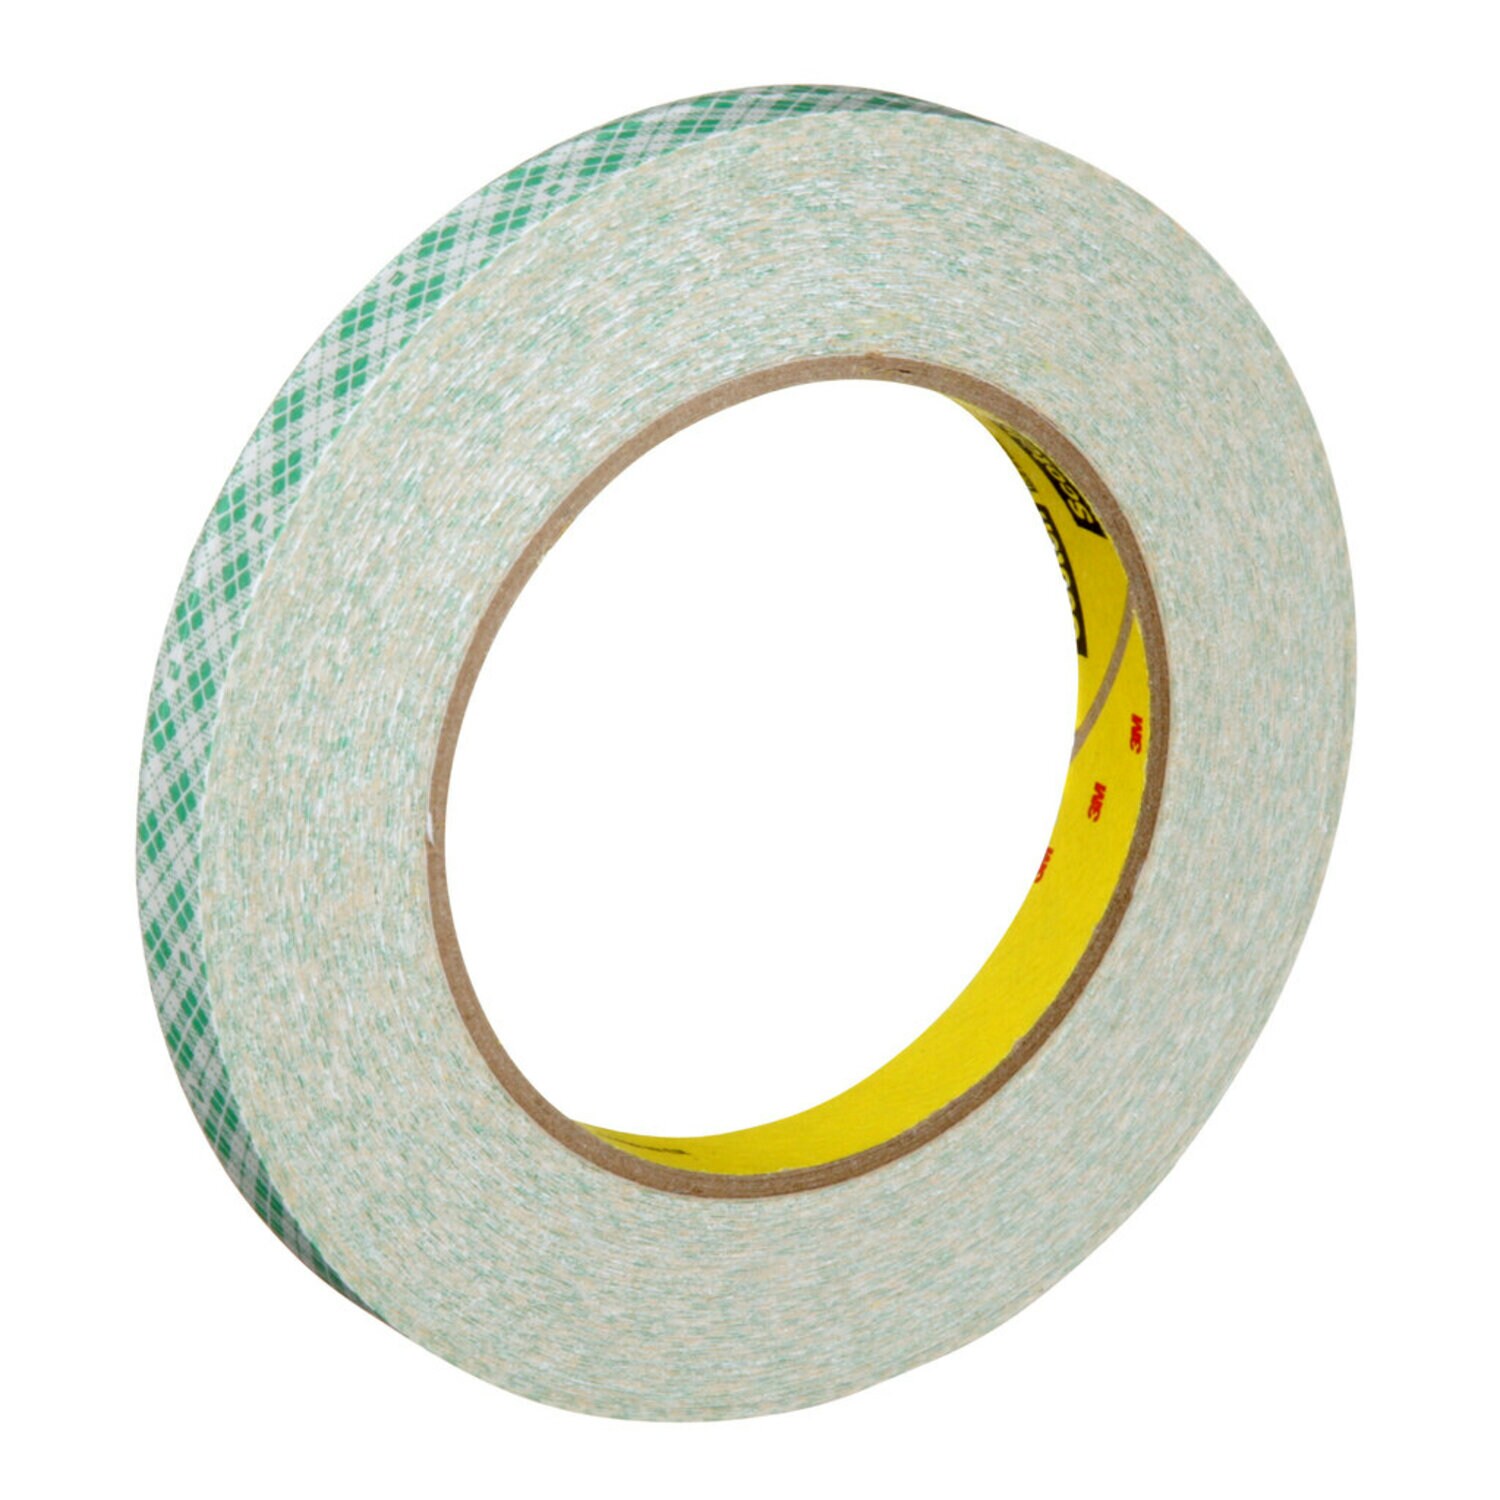 Scotch Removable Fabric Tape 3/4 in x 180 in 1/Pack Removable and Double  Sided (FTR-1-CFT) 1 roll